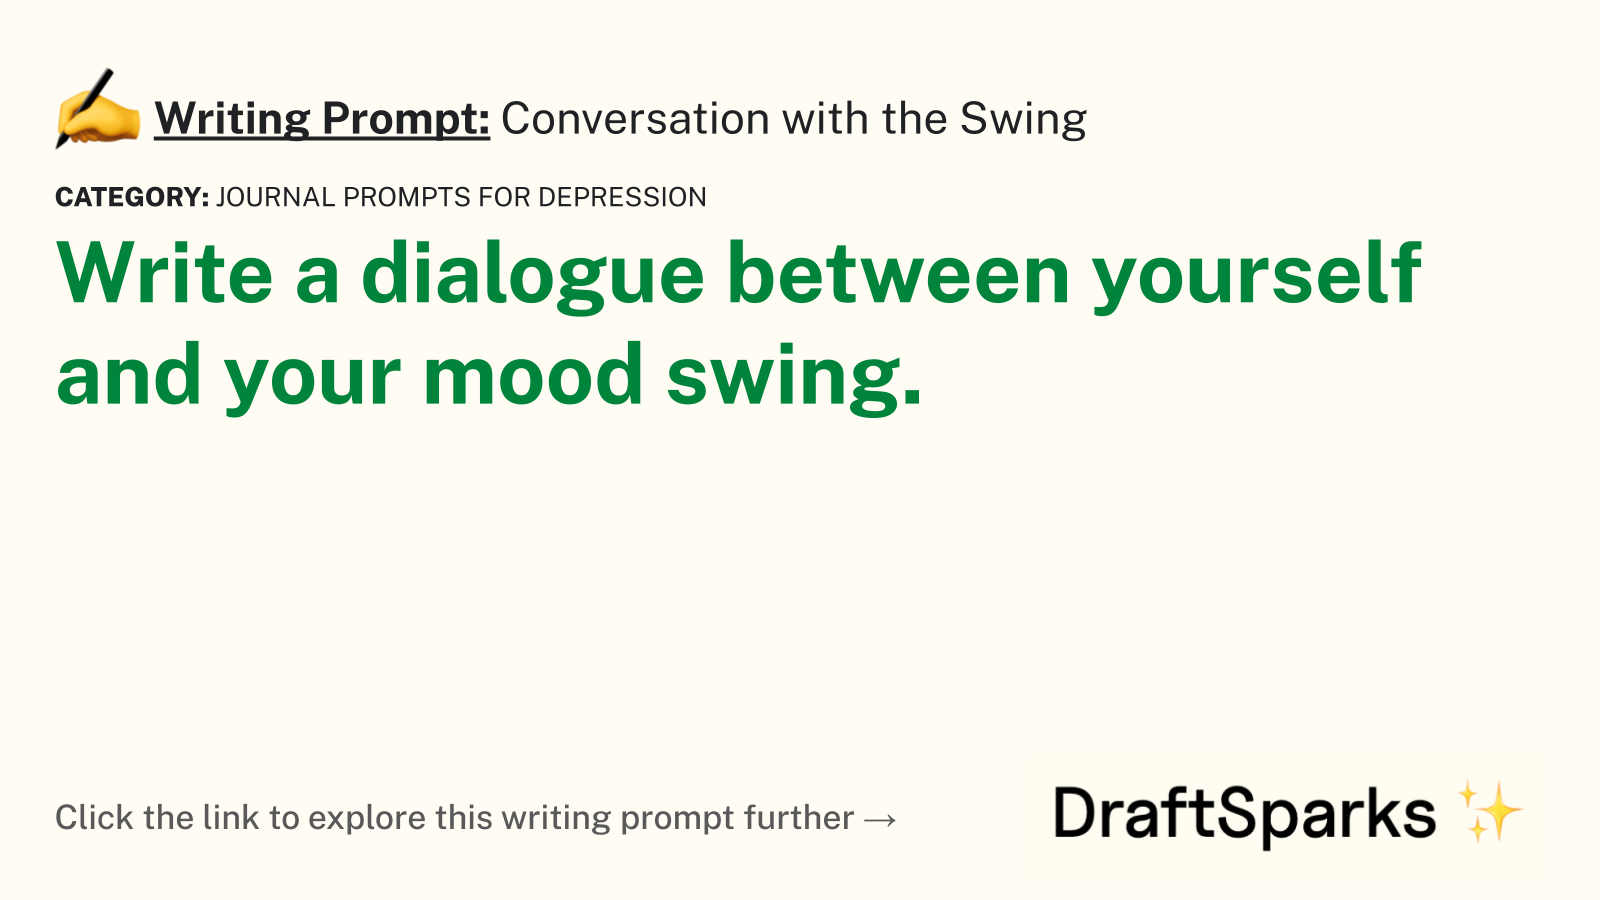 Conversation with the Swing